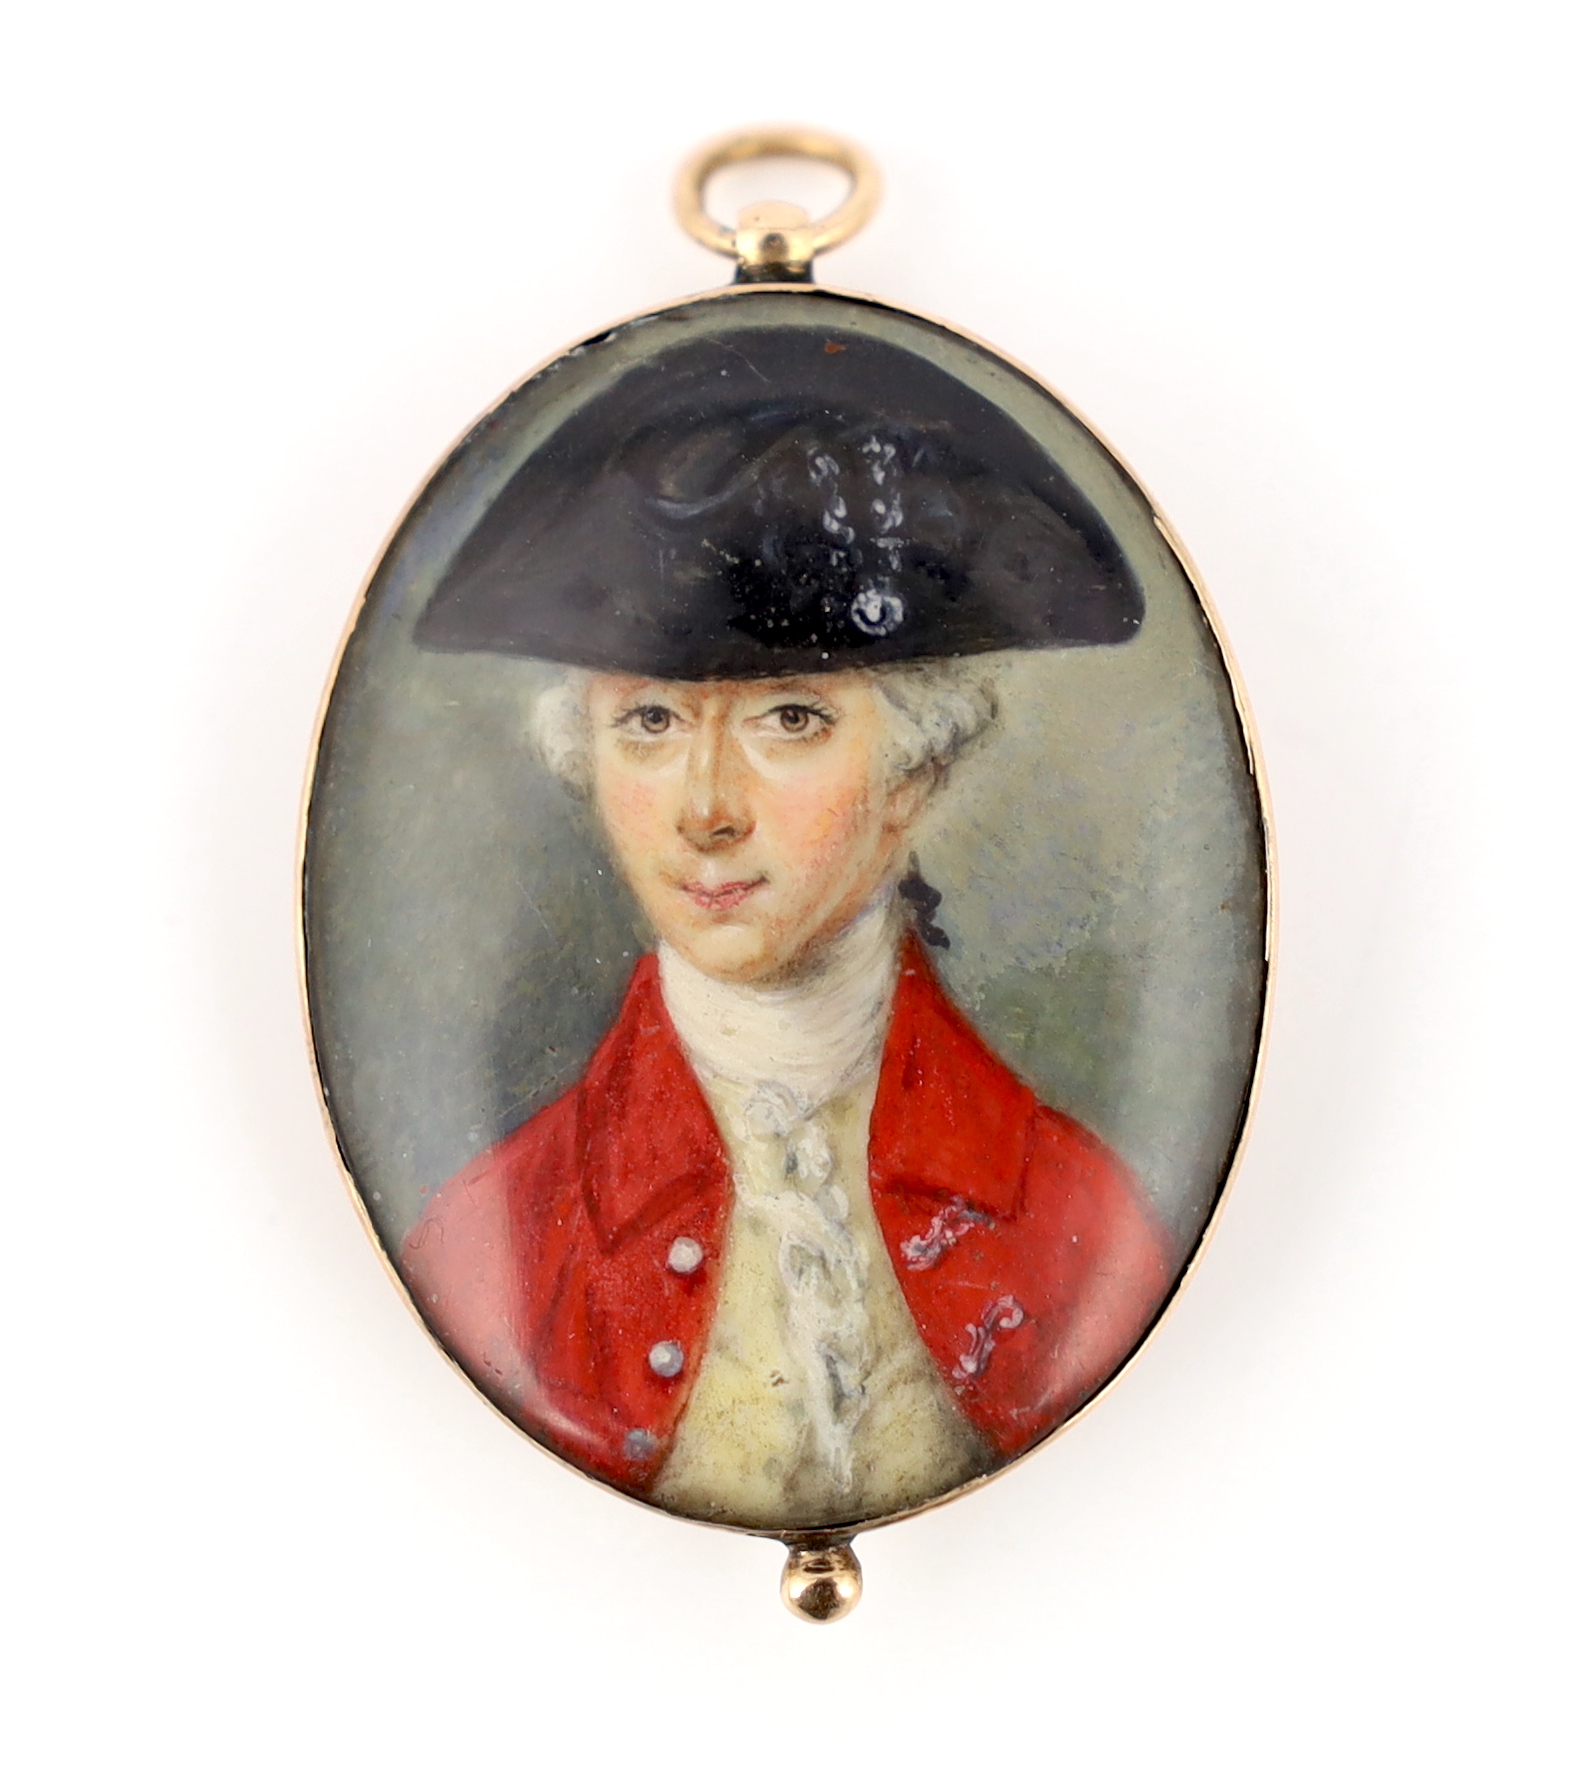 Jeremiah Meyer, R.A. (Anglo-German, 1735-1789), Portrait miniature of a gentleman, watercolour on ivory, 3.4 x 2.6cm. CITES Submission reference EZQ44EEJ                                                                   